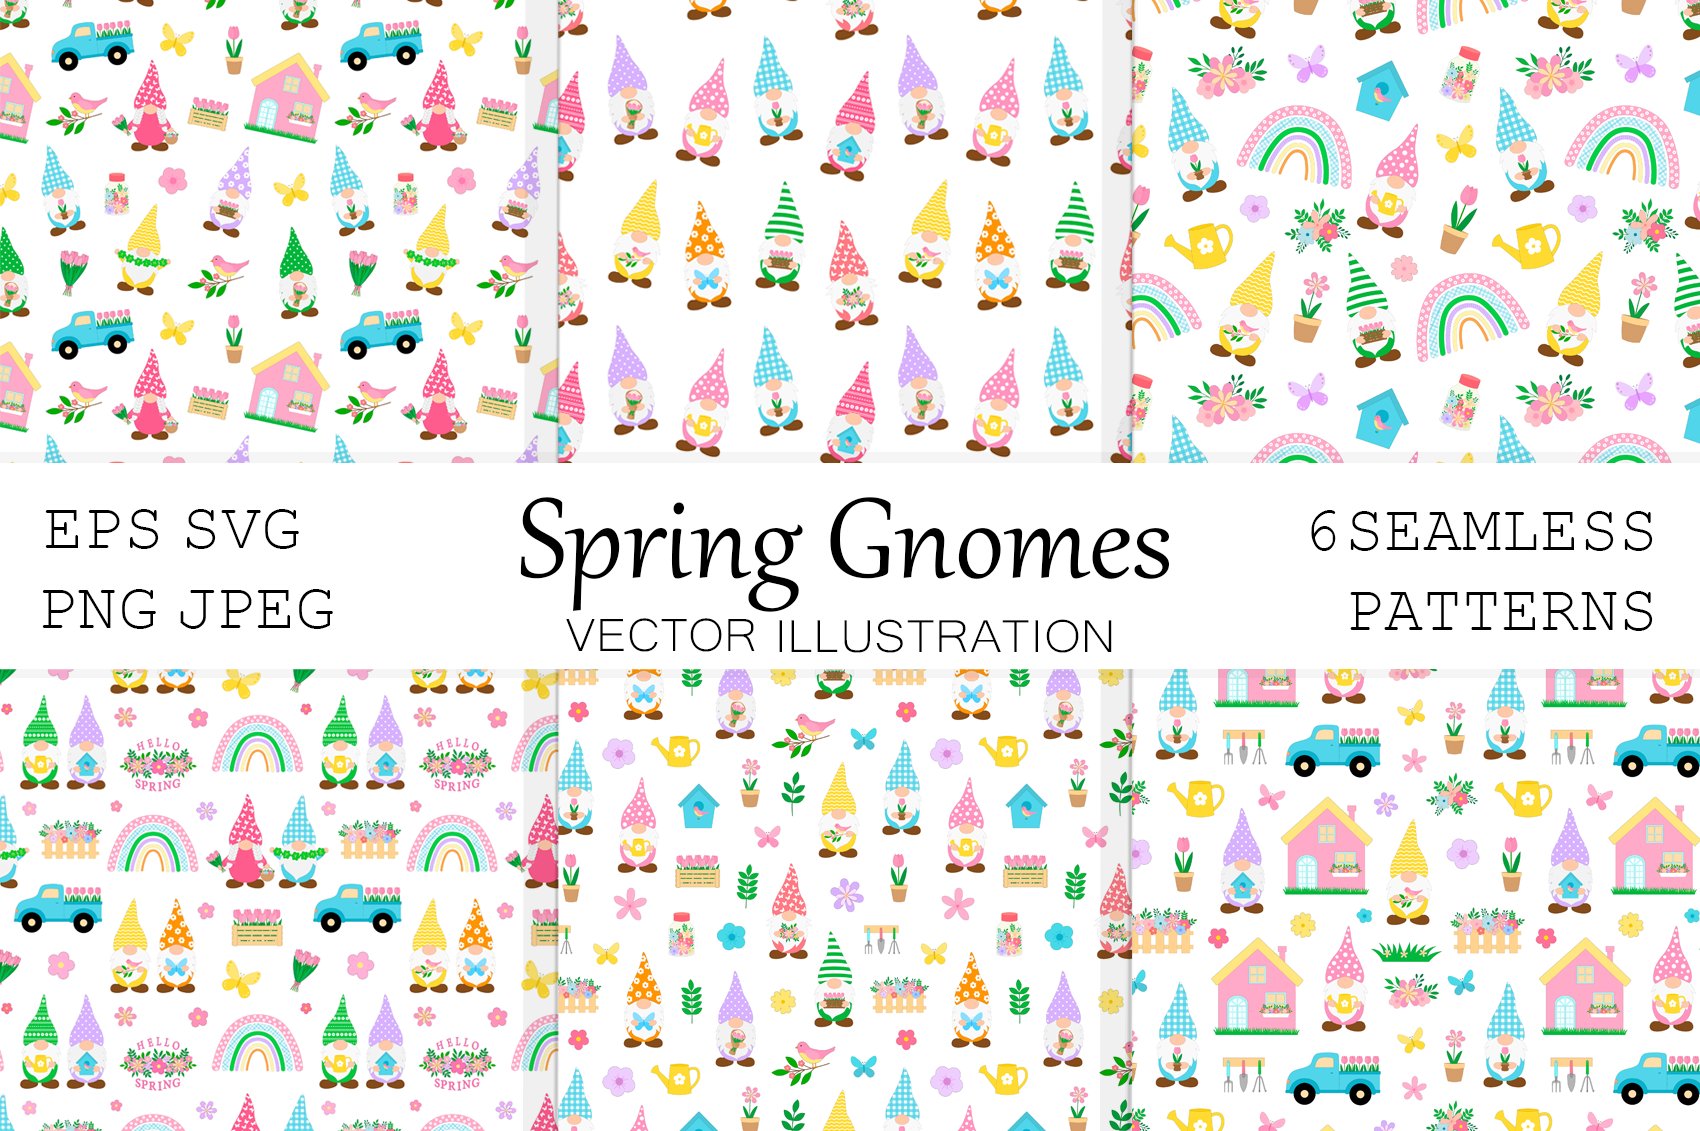 Spring Gnomes seamless patterns cover image.